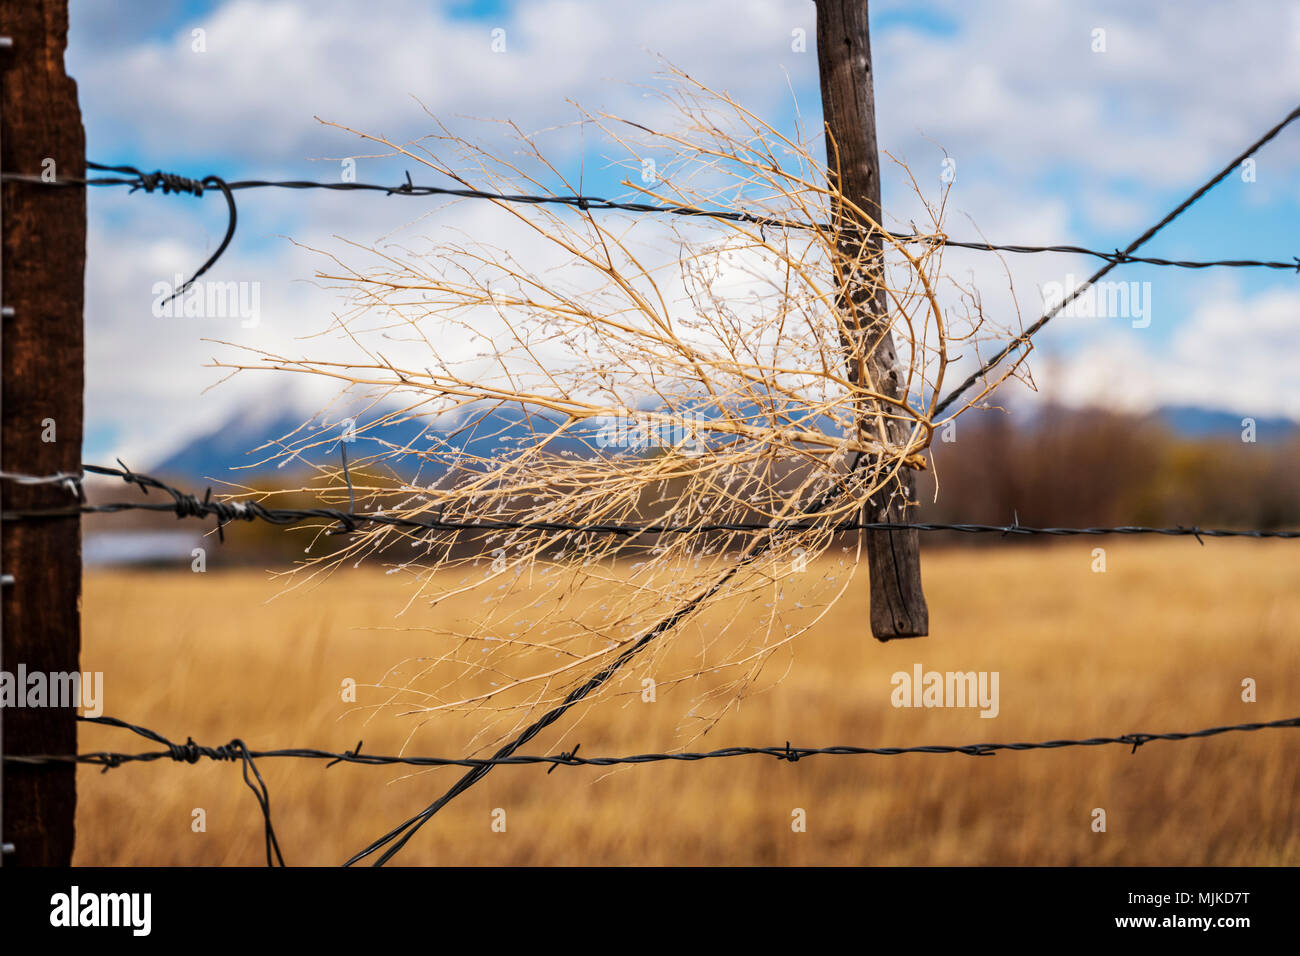 Tumbleweeds; Salsola tragus; caught in ranch barbed wire fence Stock Photo